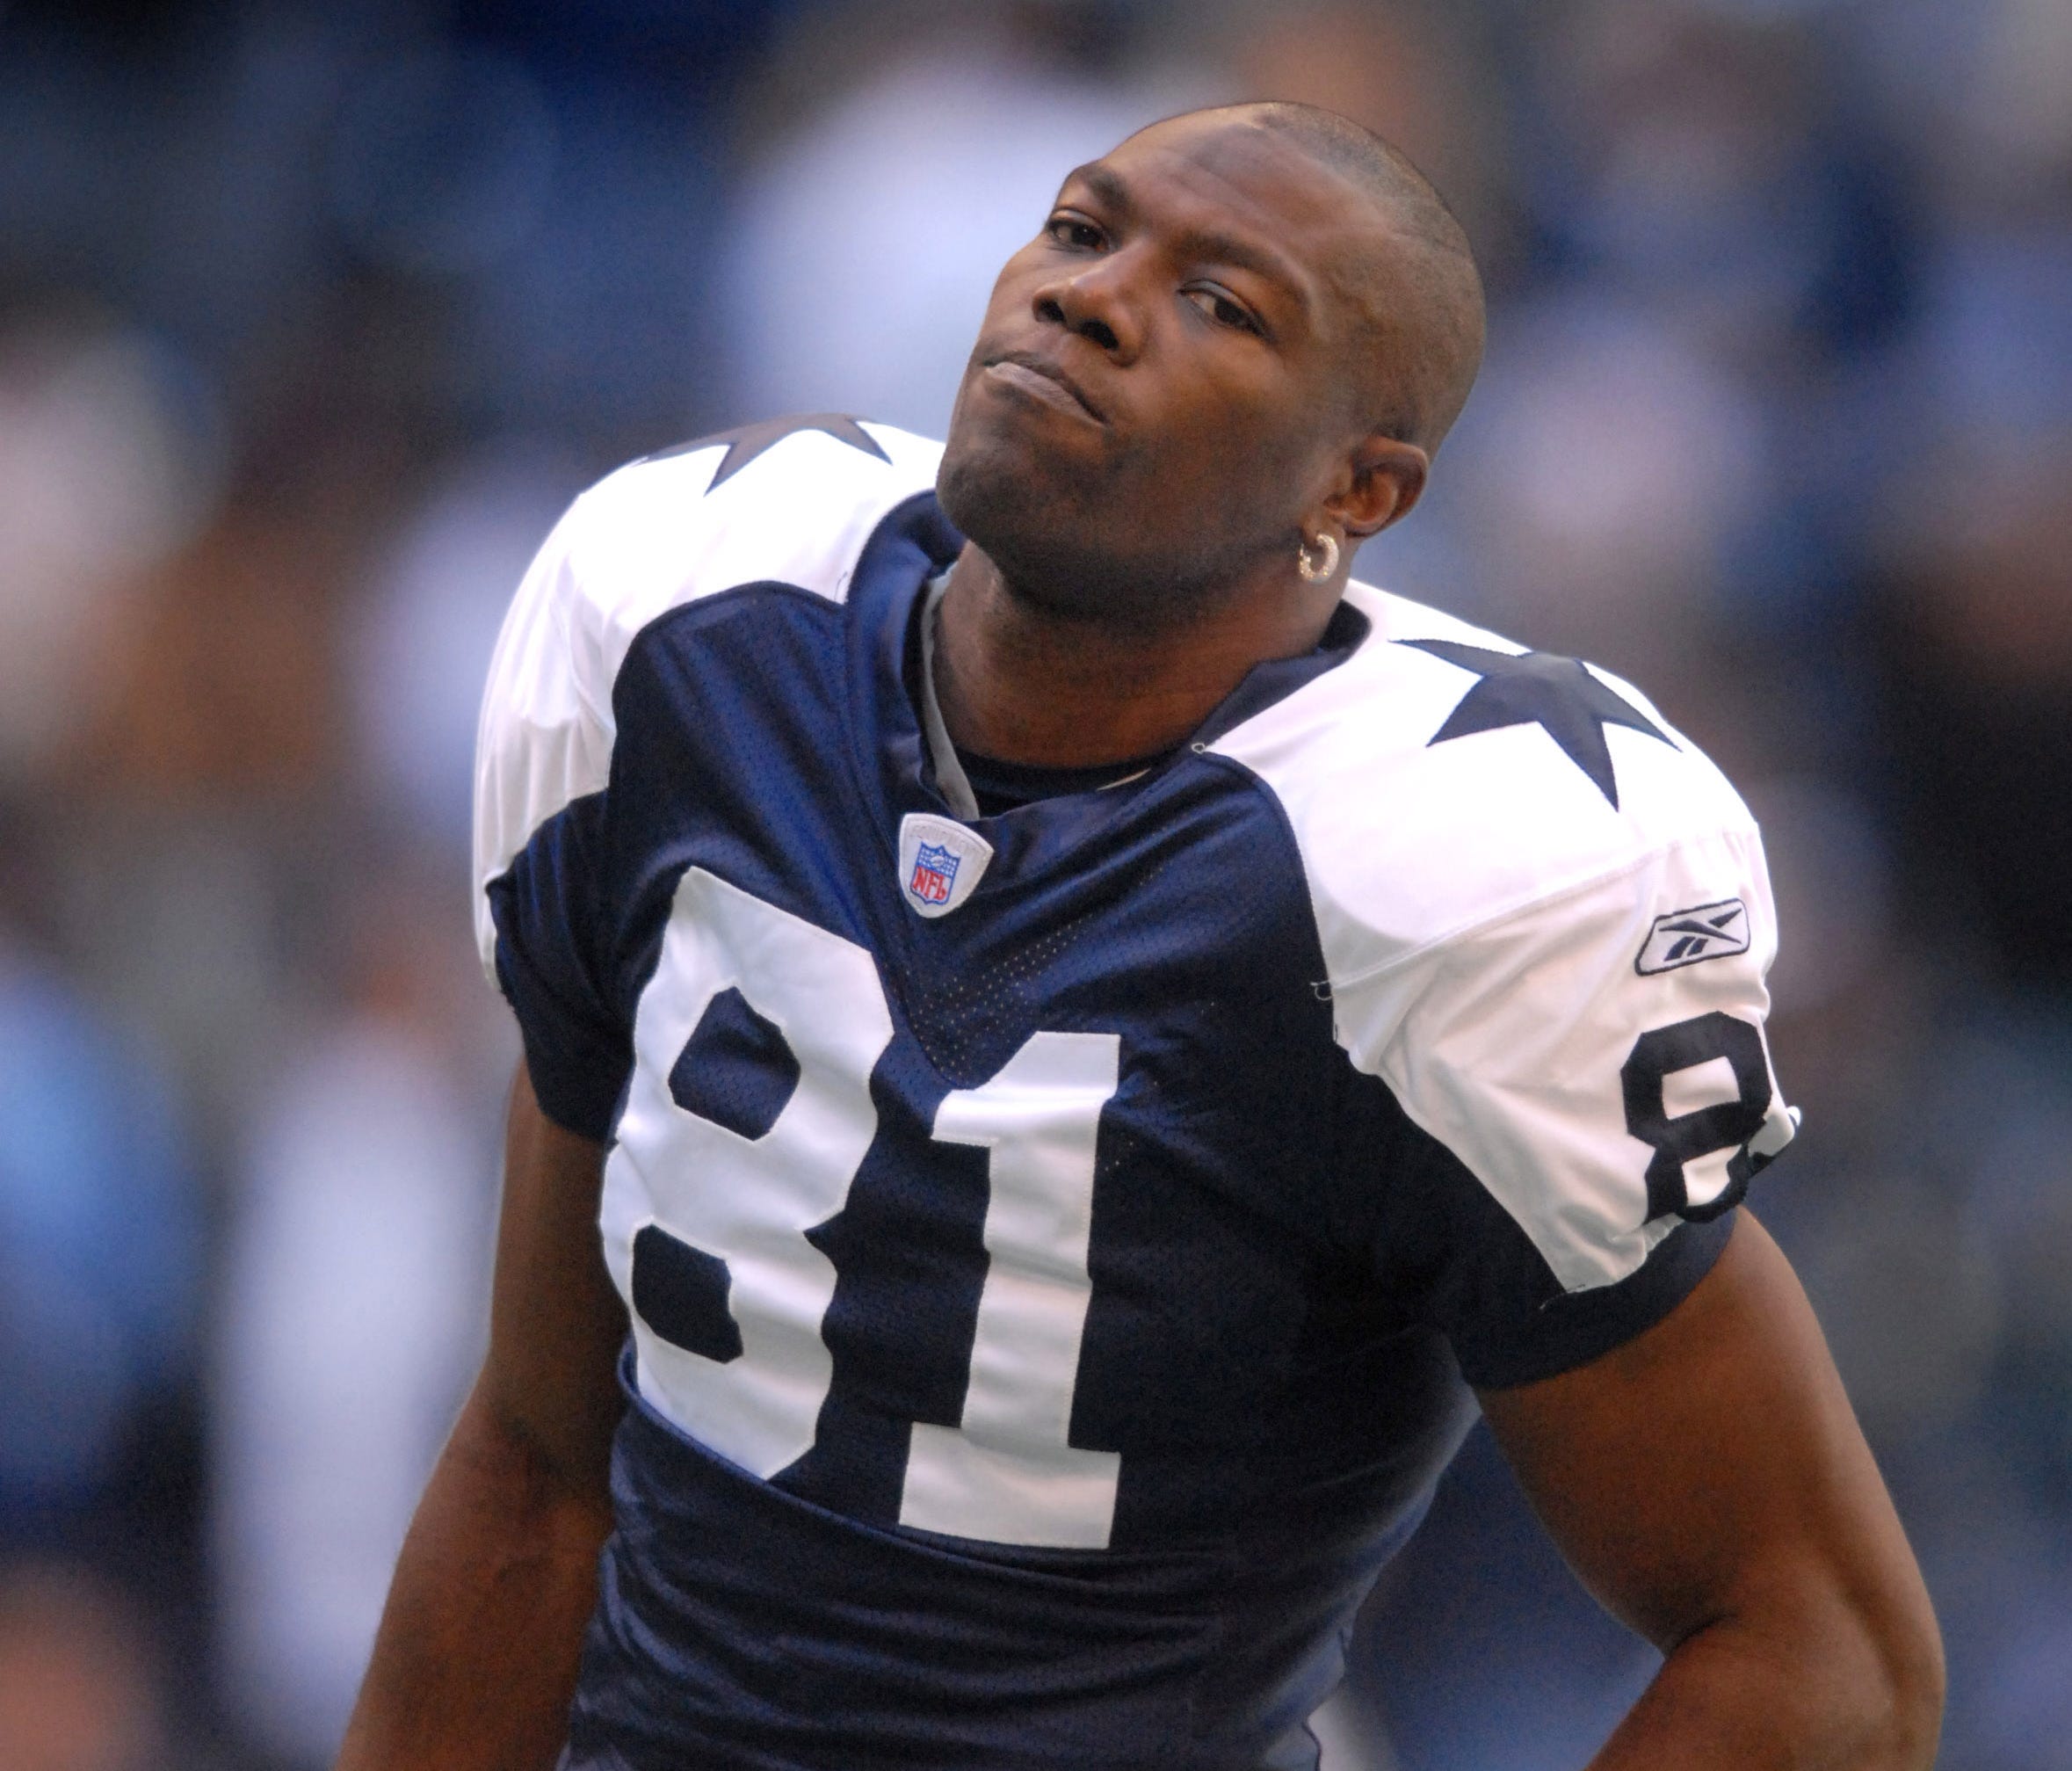 Dallas Cowboys wide receiver (81) Terrell Owens warms up before a game against the Philadelphia Eagles at Texas Stadium in Irving, Texas.